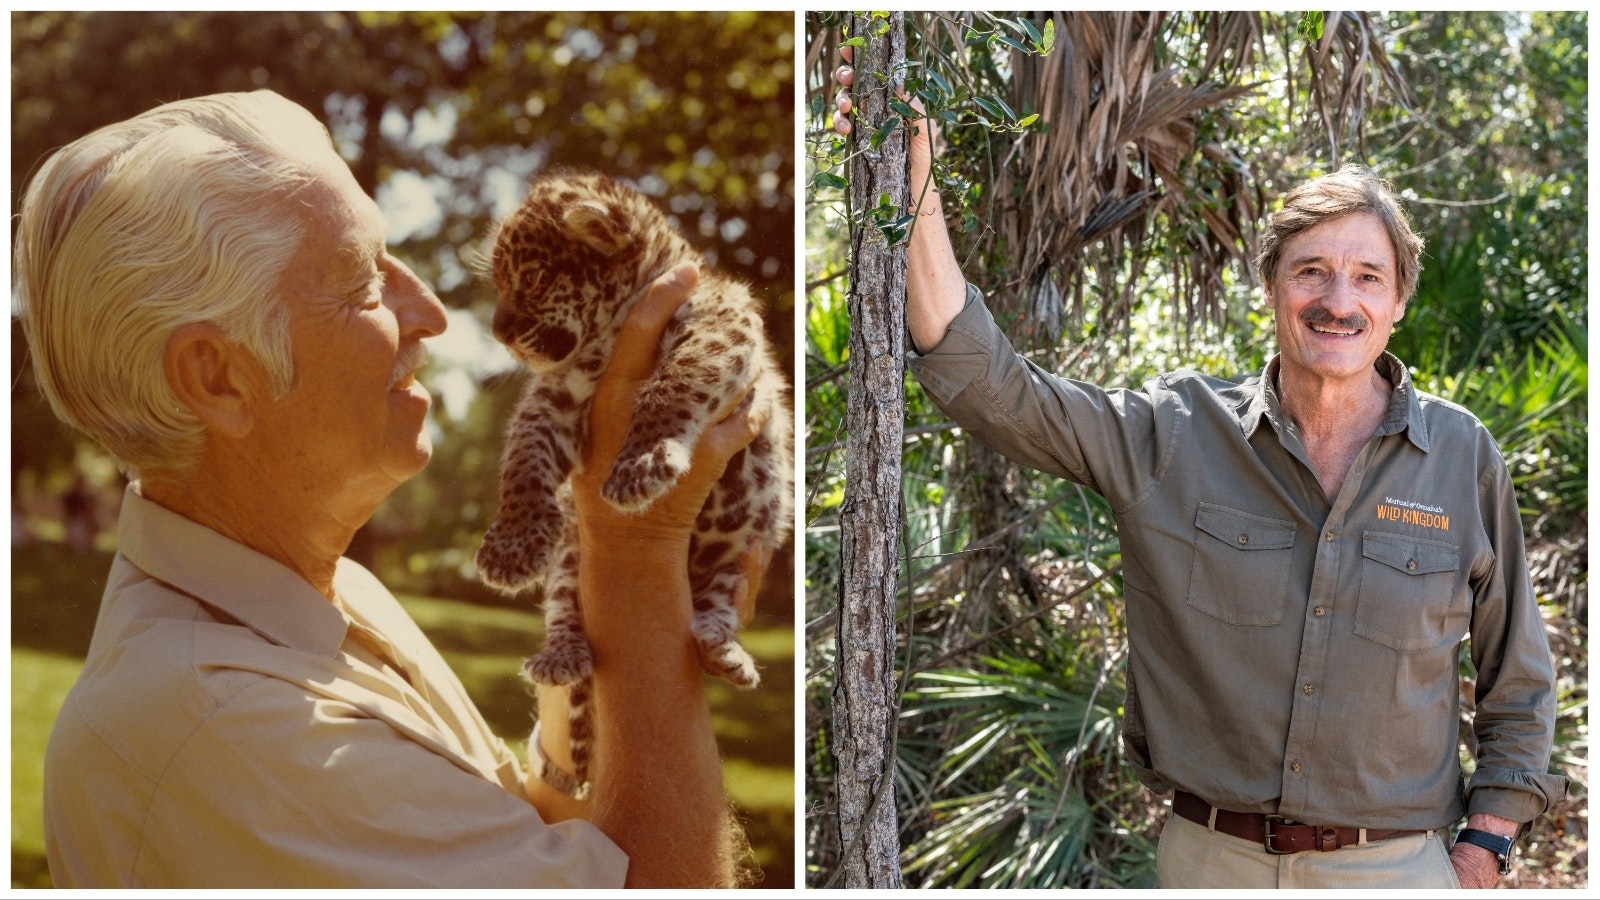 Marlin Perkins, left, is the original host of "Wild Kingdom," which is still going strong in its 60th year with current host Peter Gros, right.